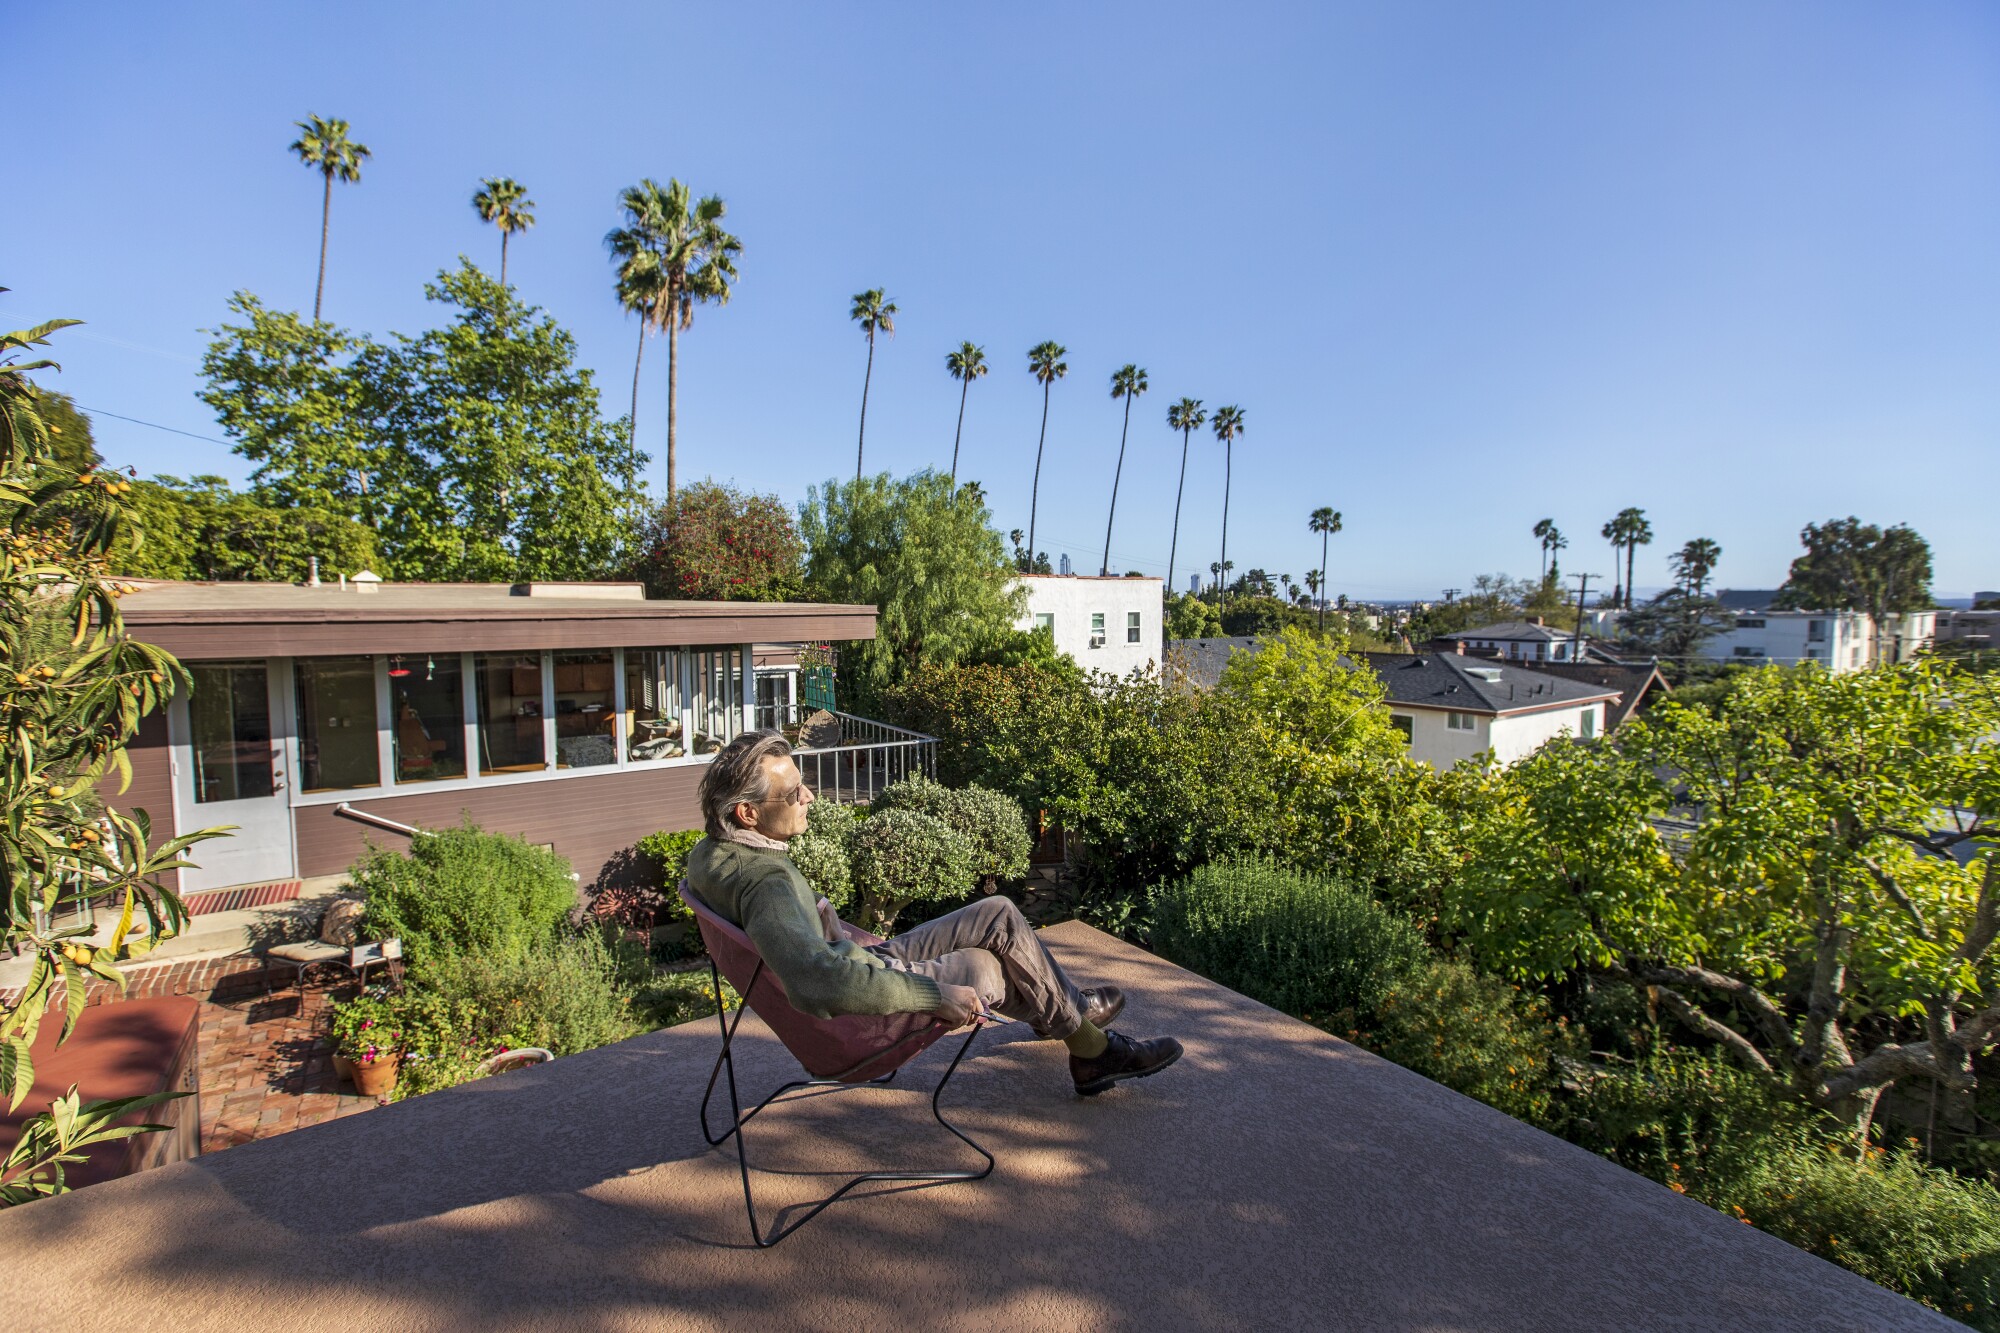 A man sits on a rooftop deck with views of palm trees and homes in the distance.